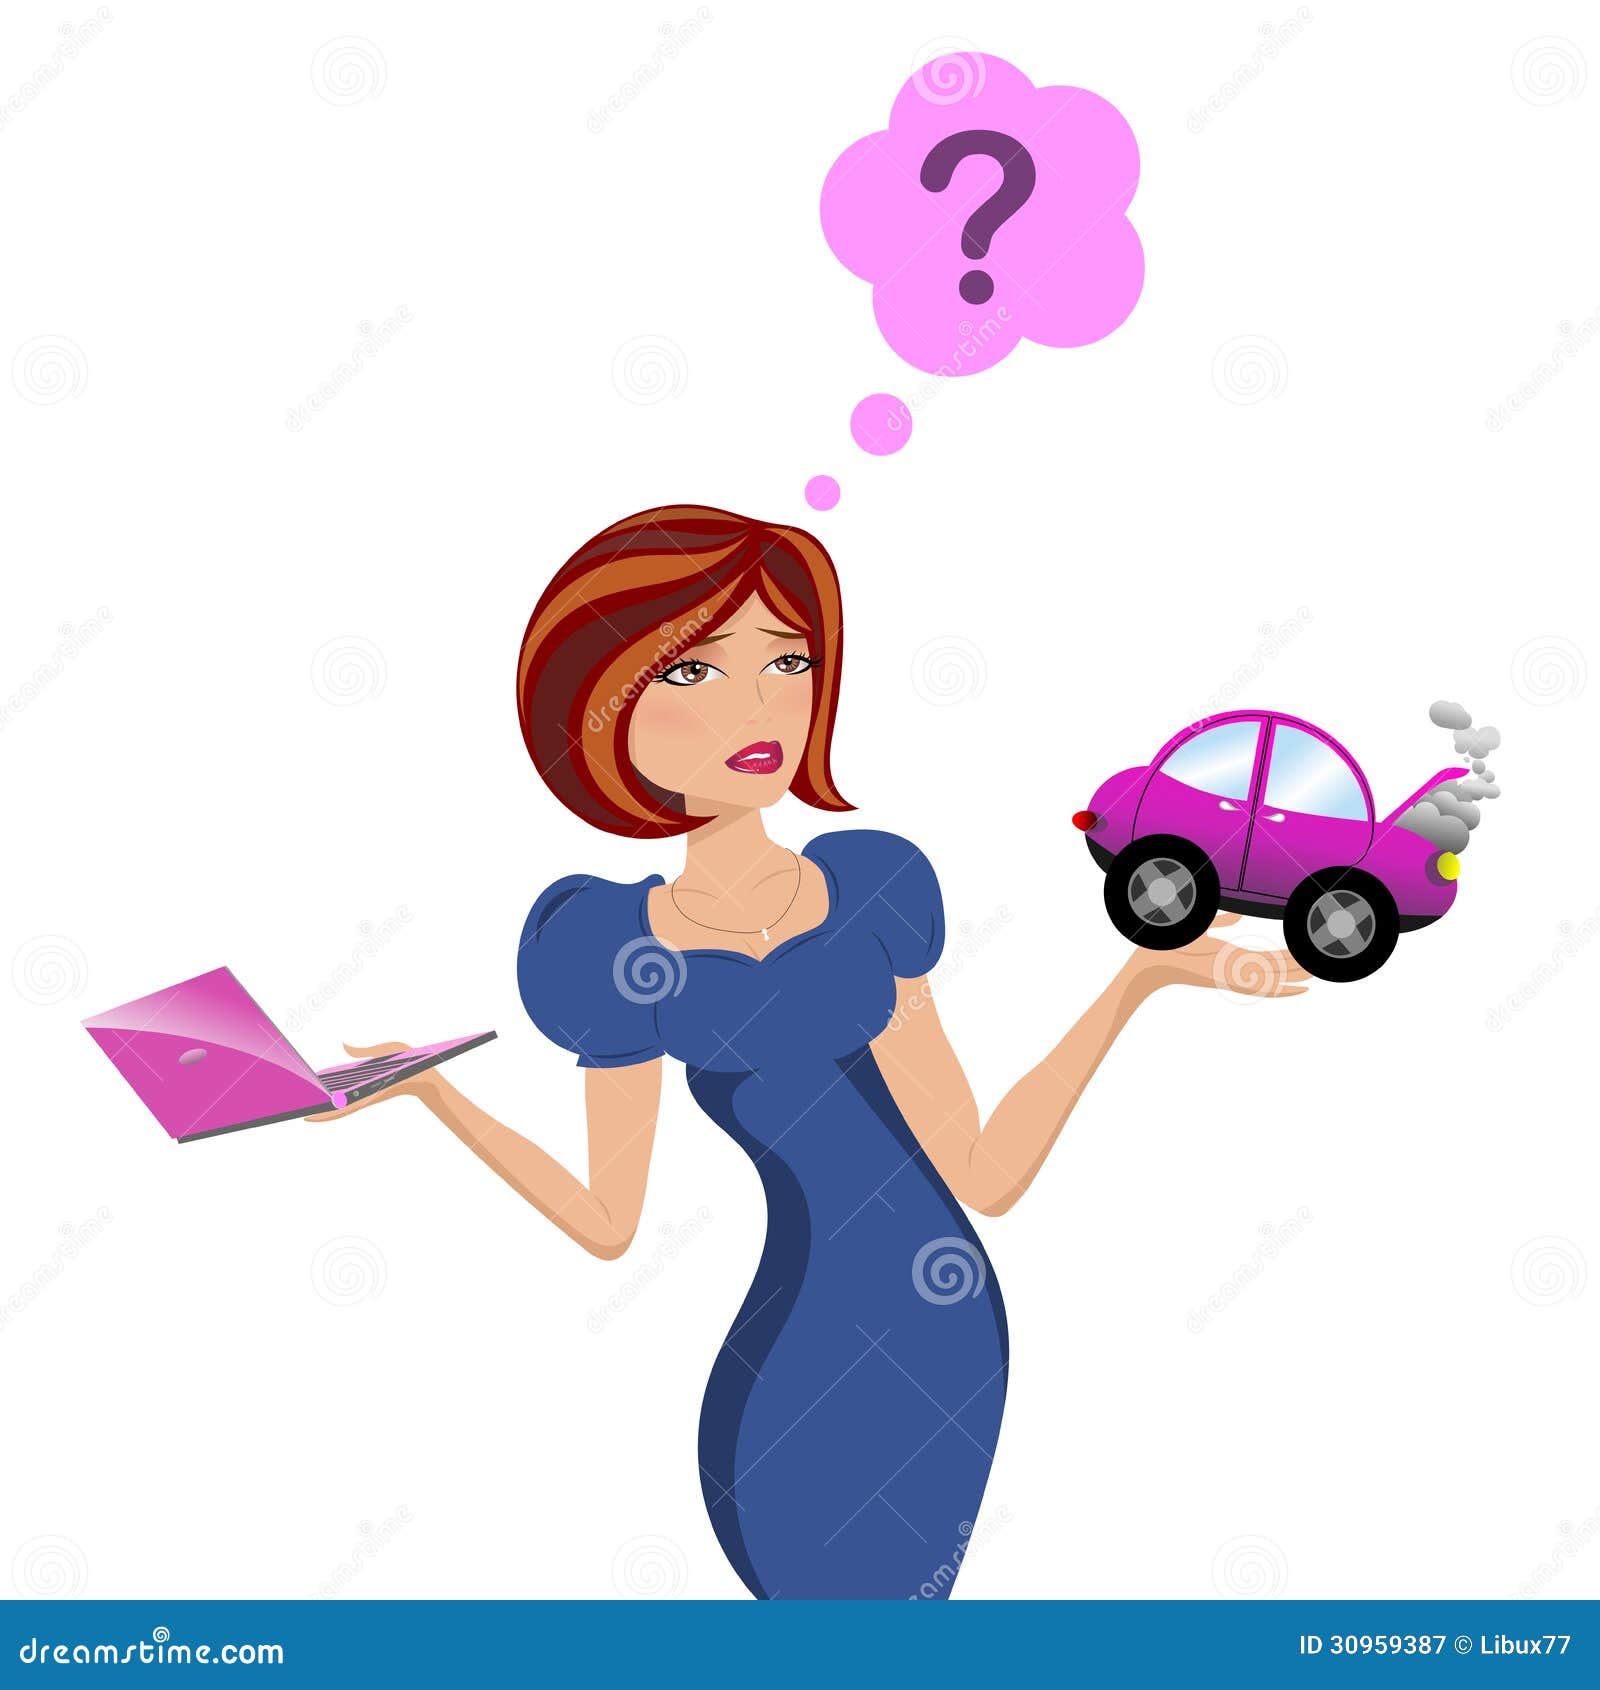 Woman Having Trouble Royalty Free Stock Photography  Image: 30959387